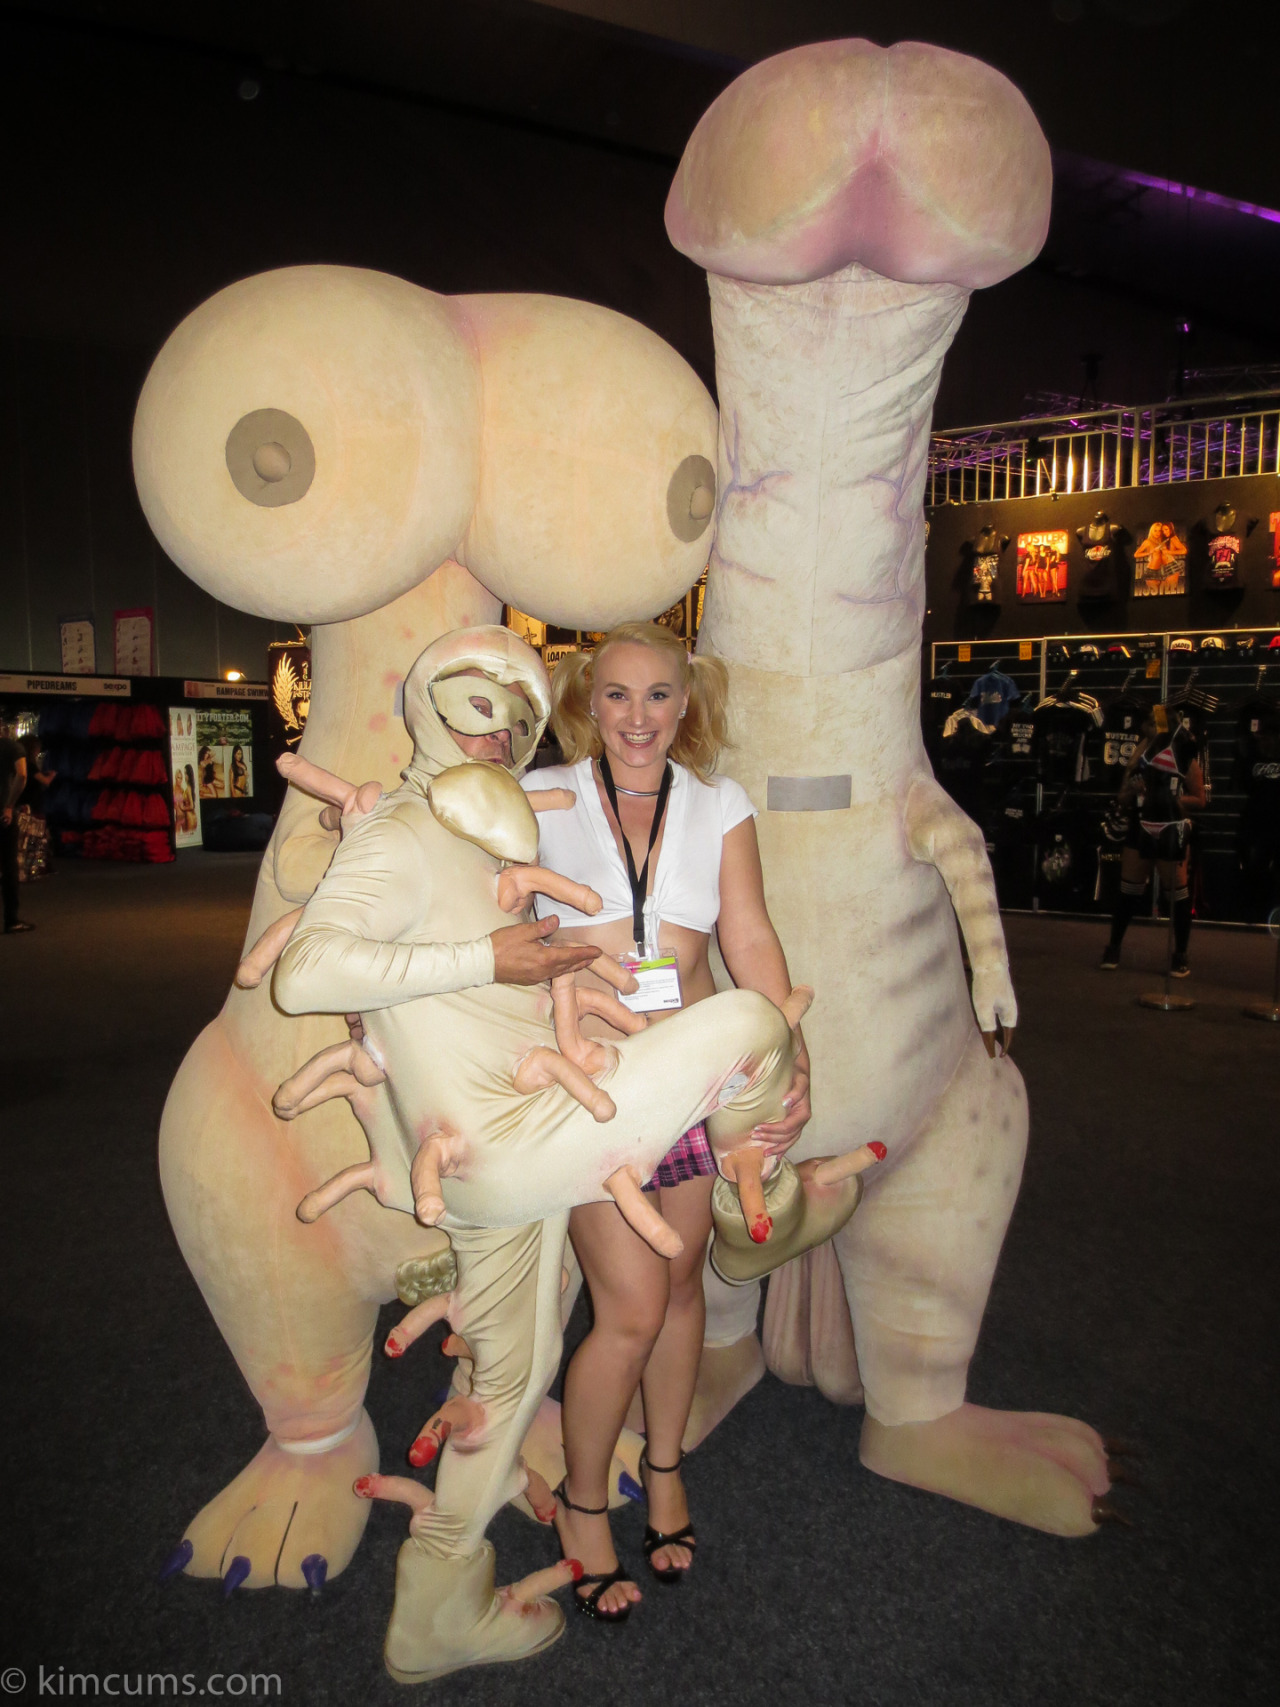 In case you missed my posts on Twitter during Sexpo, I am doing a Sexpo picture round